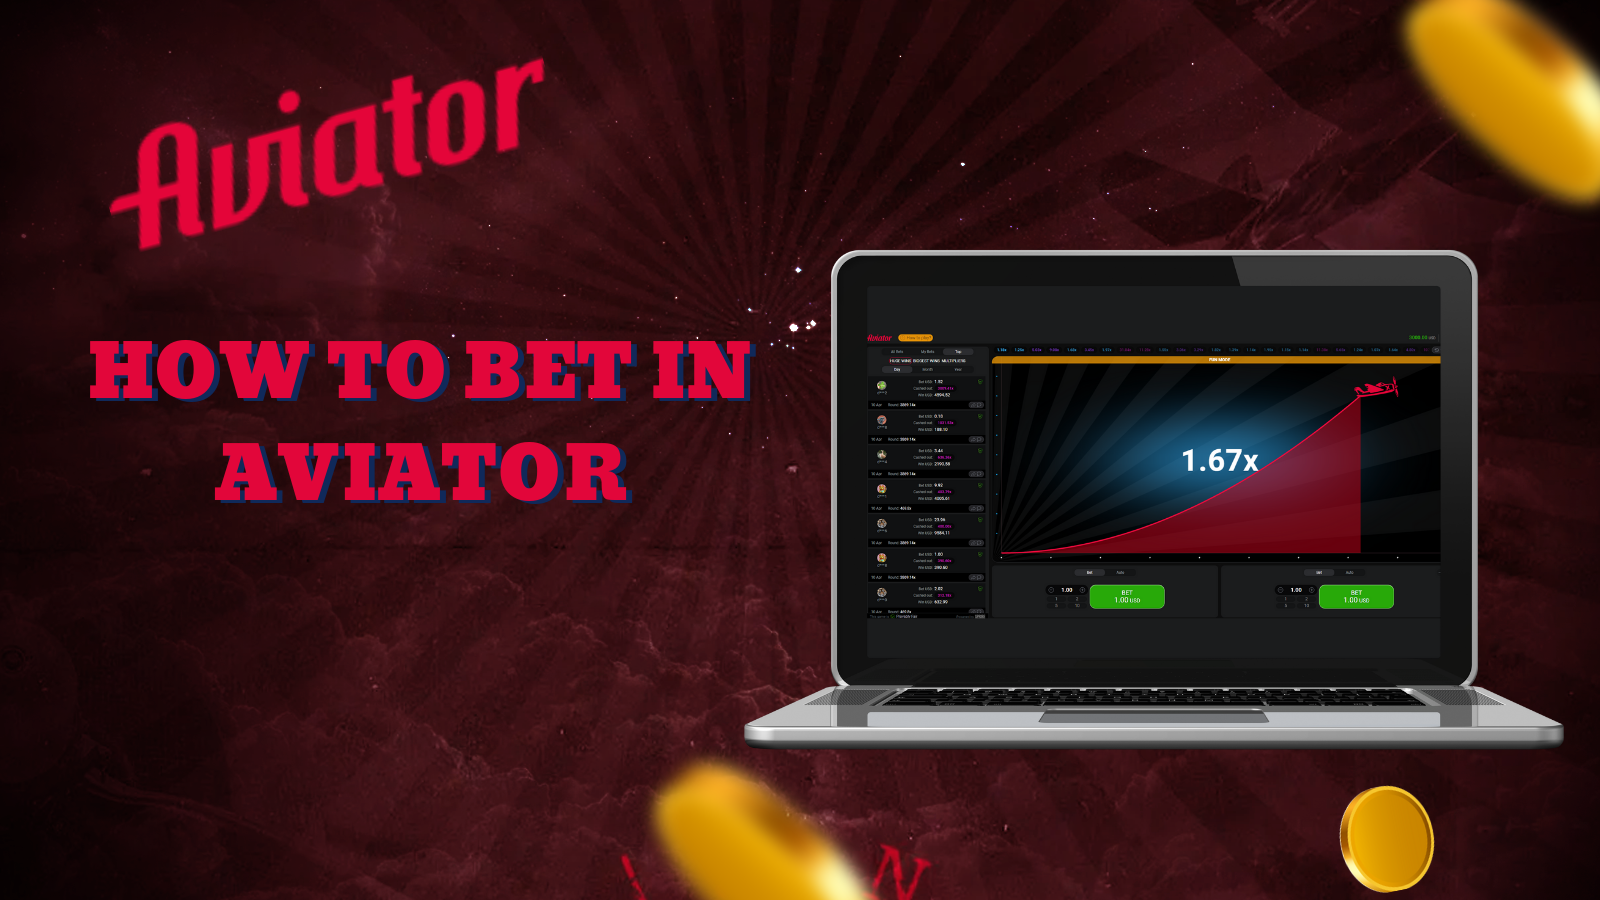 How to bet in Aviator